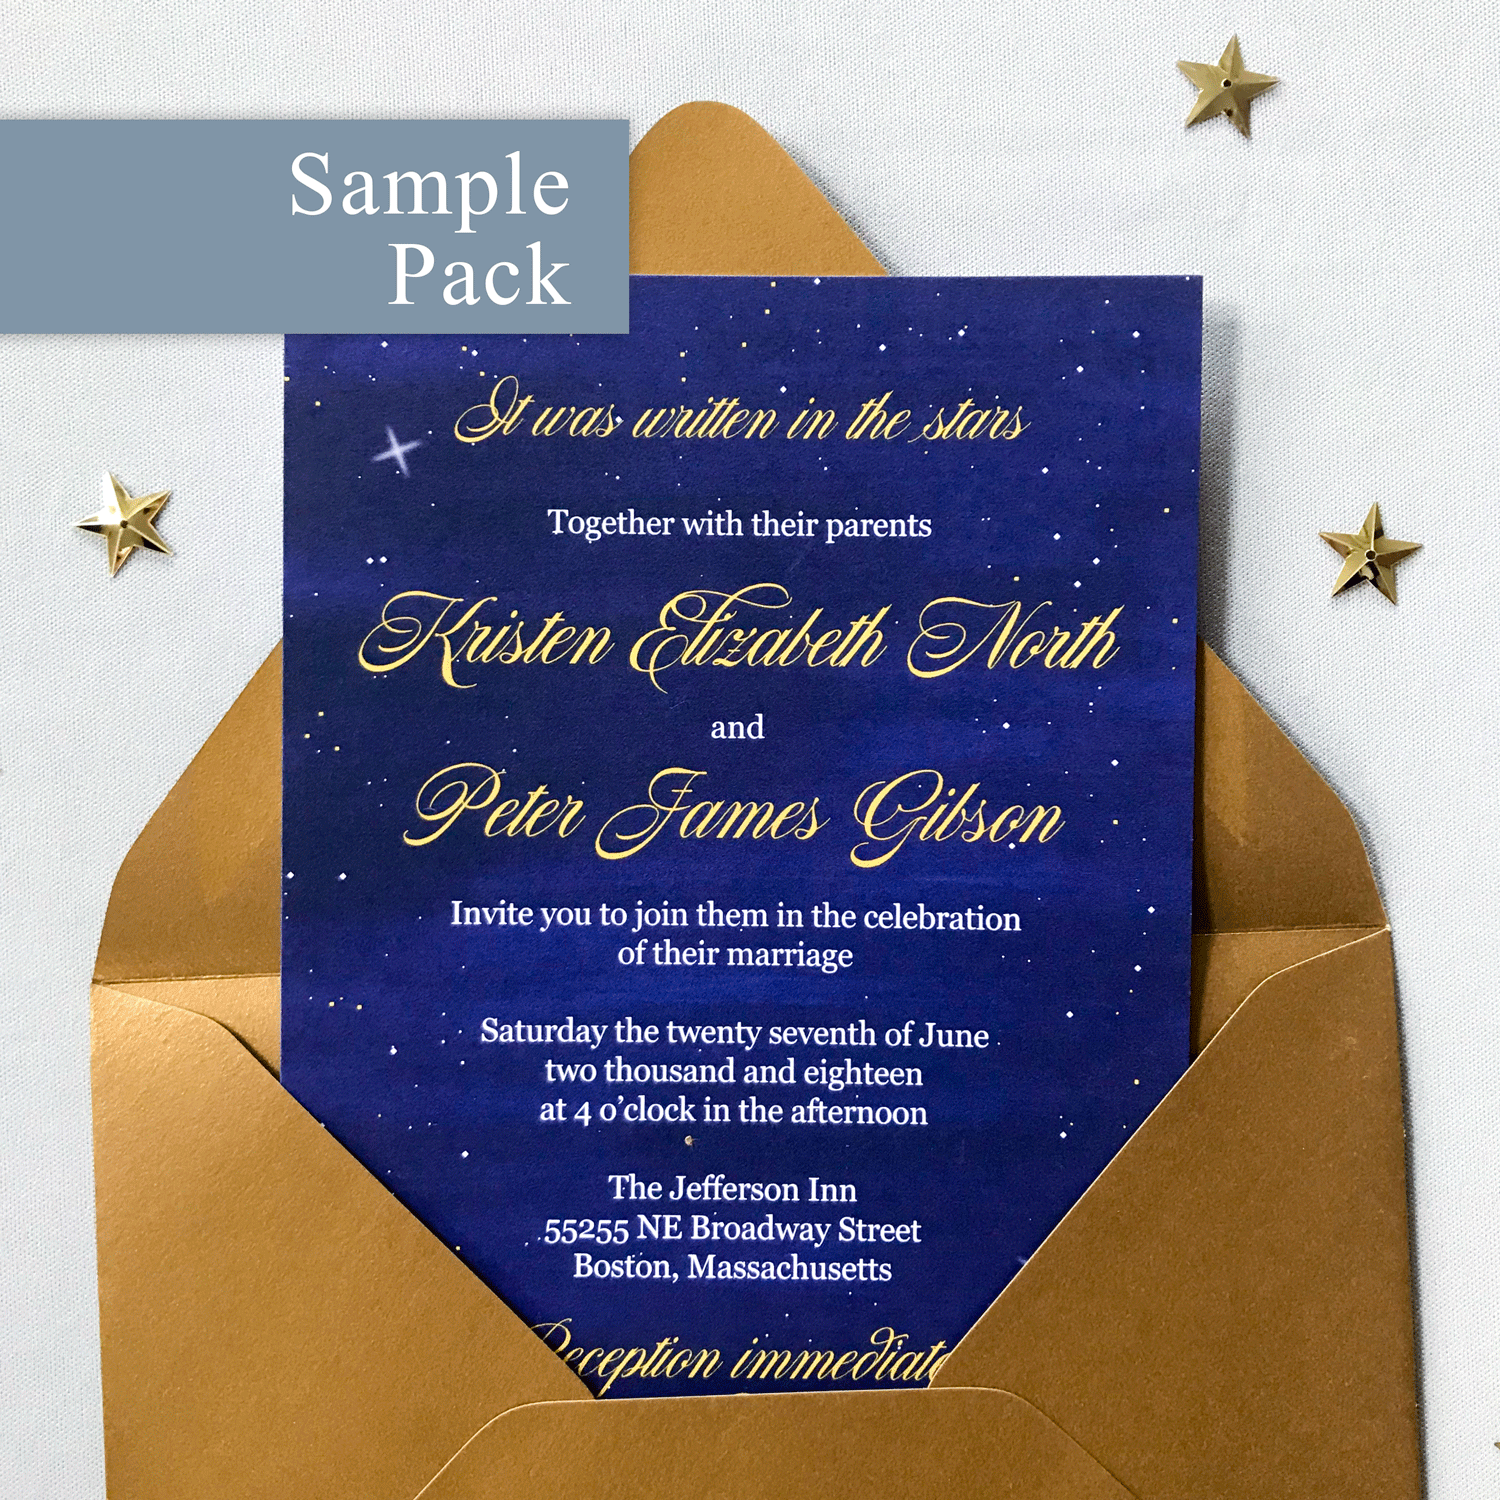 Wedding Invitation Sample Pack - The Luna Suite - Written in the Stars Navy Blue and Gold Wedding Theme